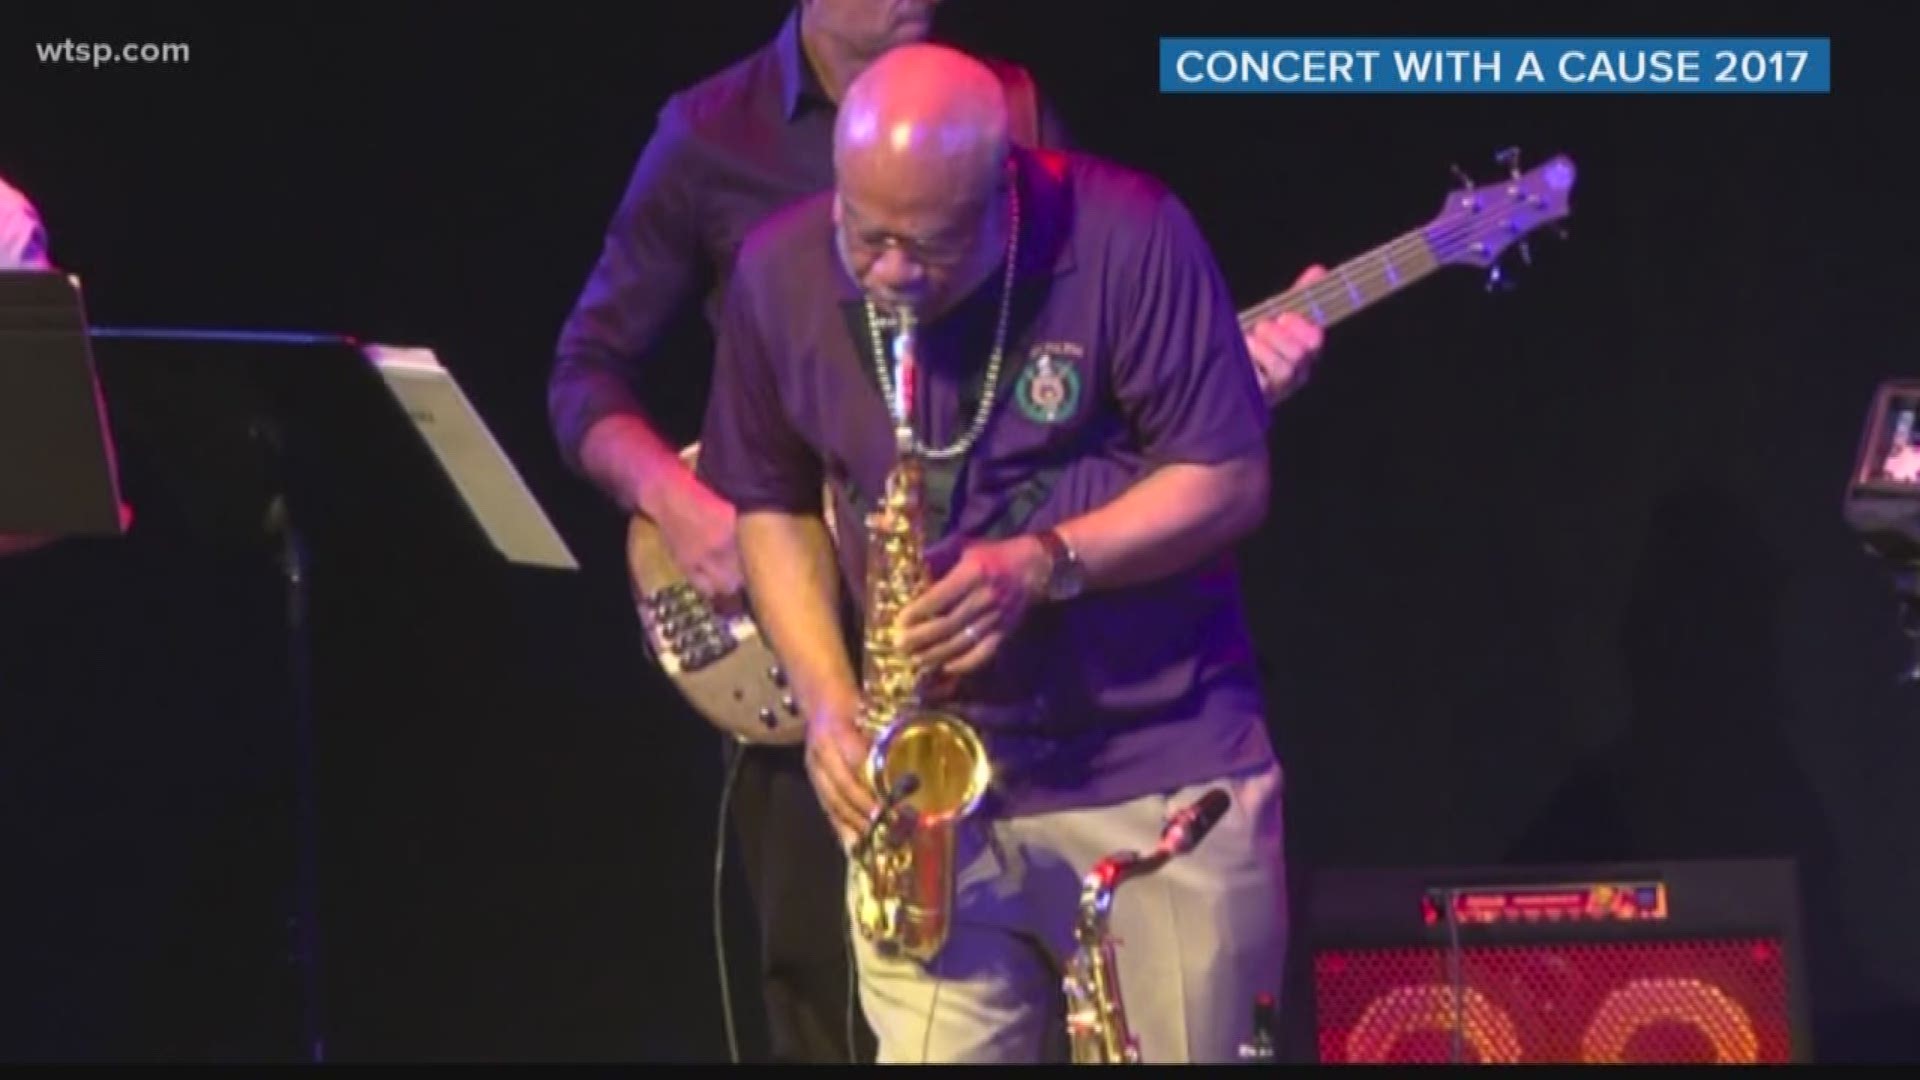 One of the concert's top performers is a man who is a doctor by day and a saxophonist by night.